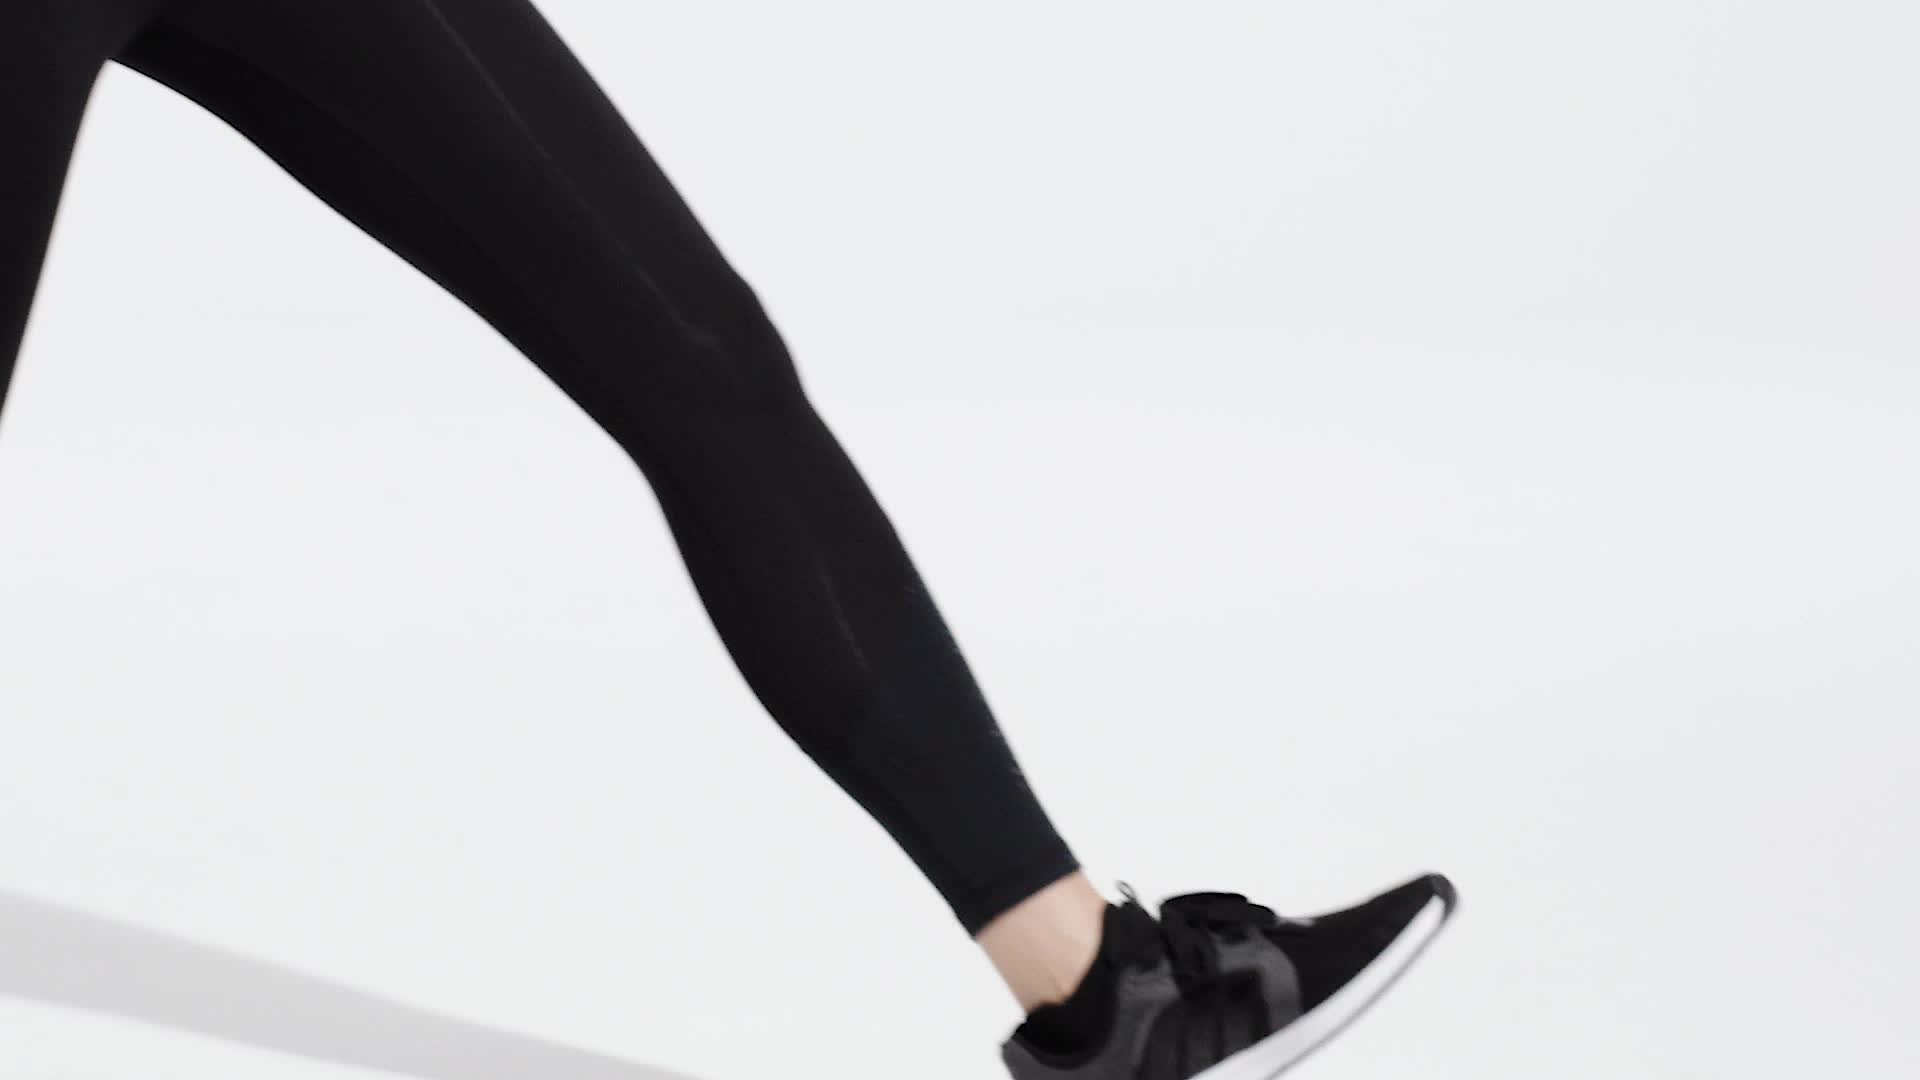 Adidas Black Climalite Cropped Leggings - $20 (63% Off Retail) - From Gianna